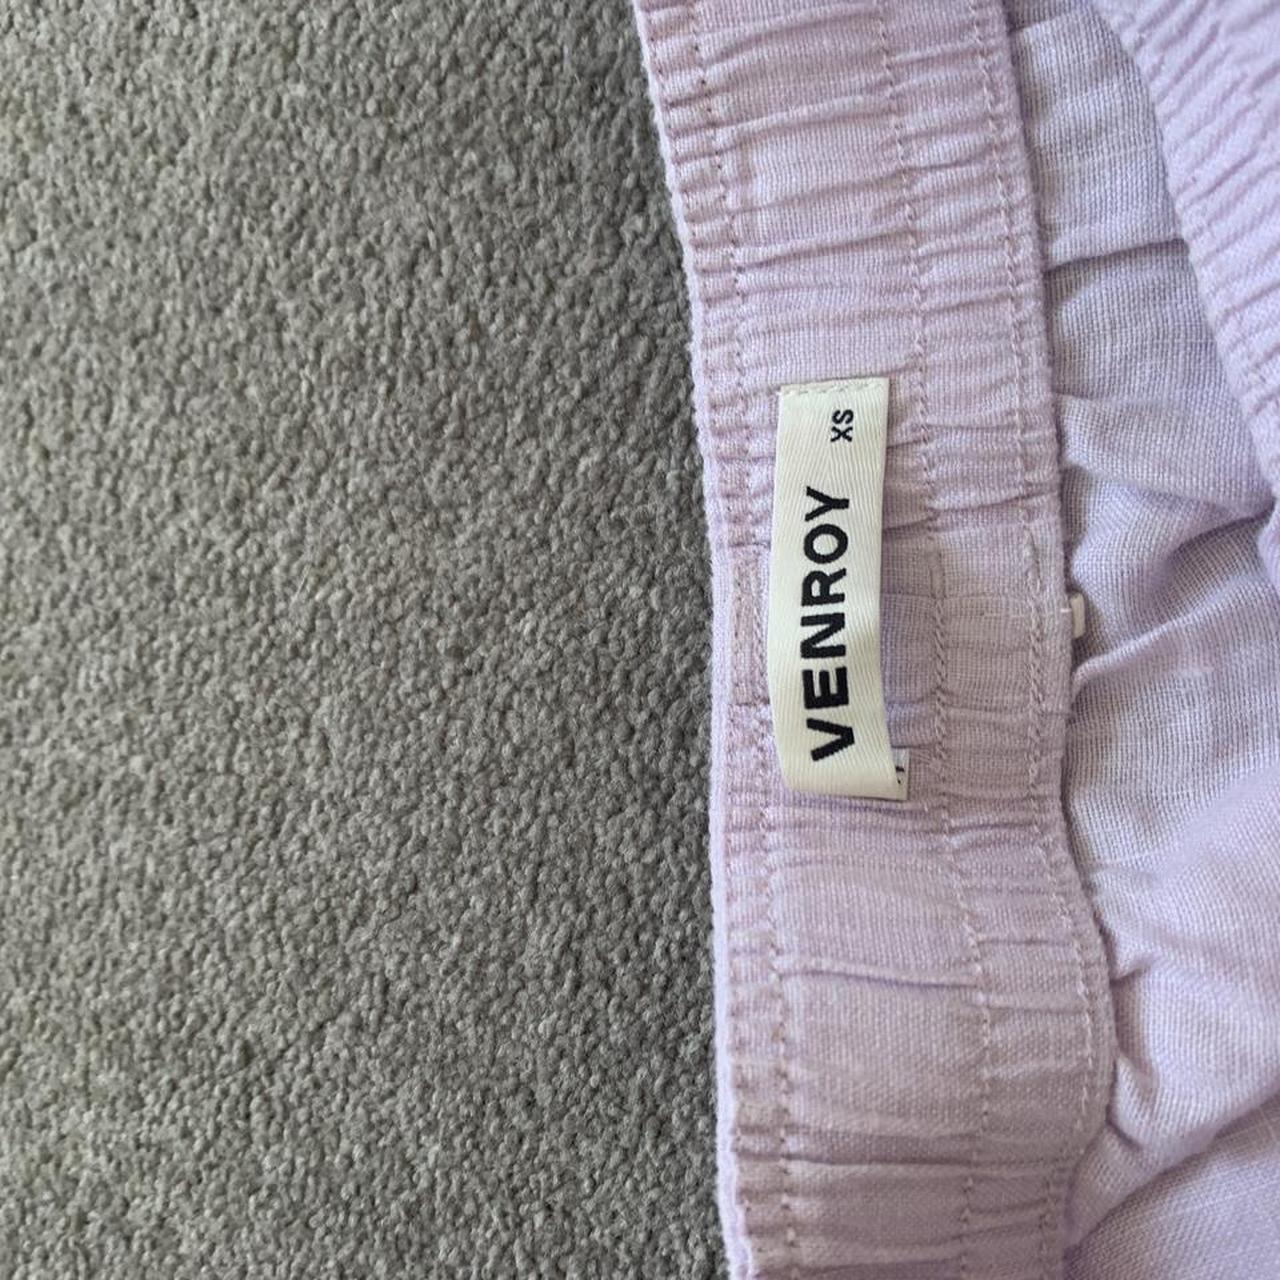 LILAC VENROY LOUNGE SKIRT - COLOUR NOT SOLD ANYMORE... - Depop